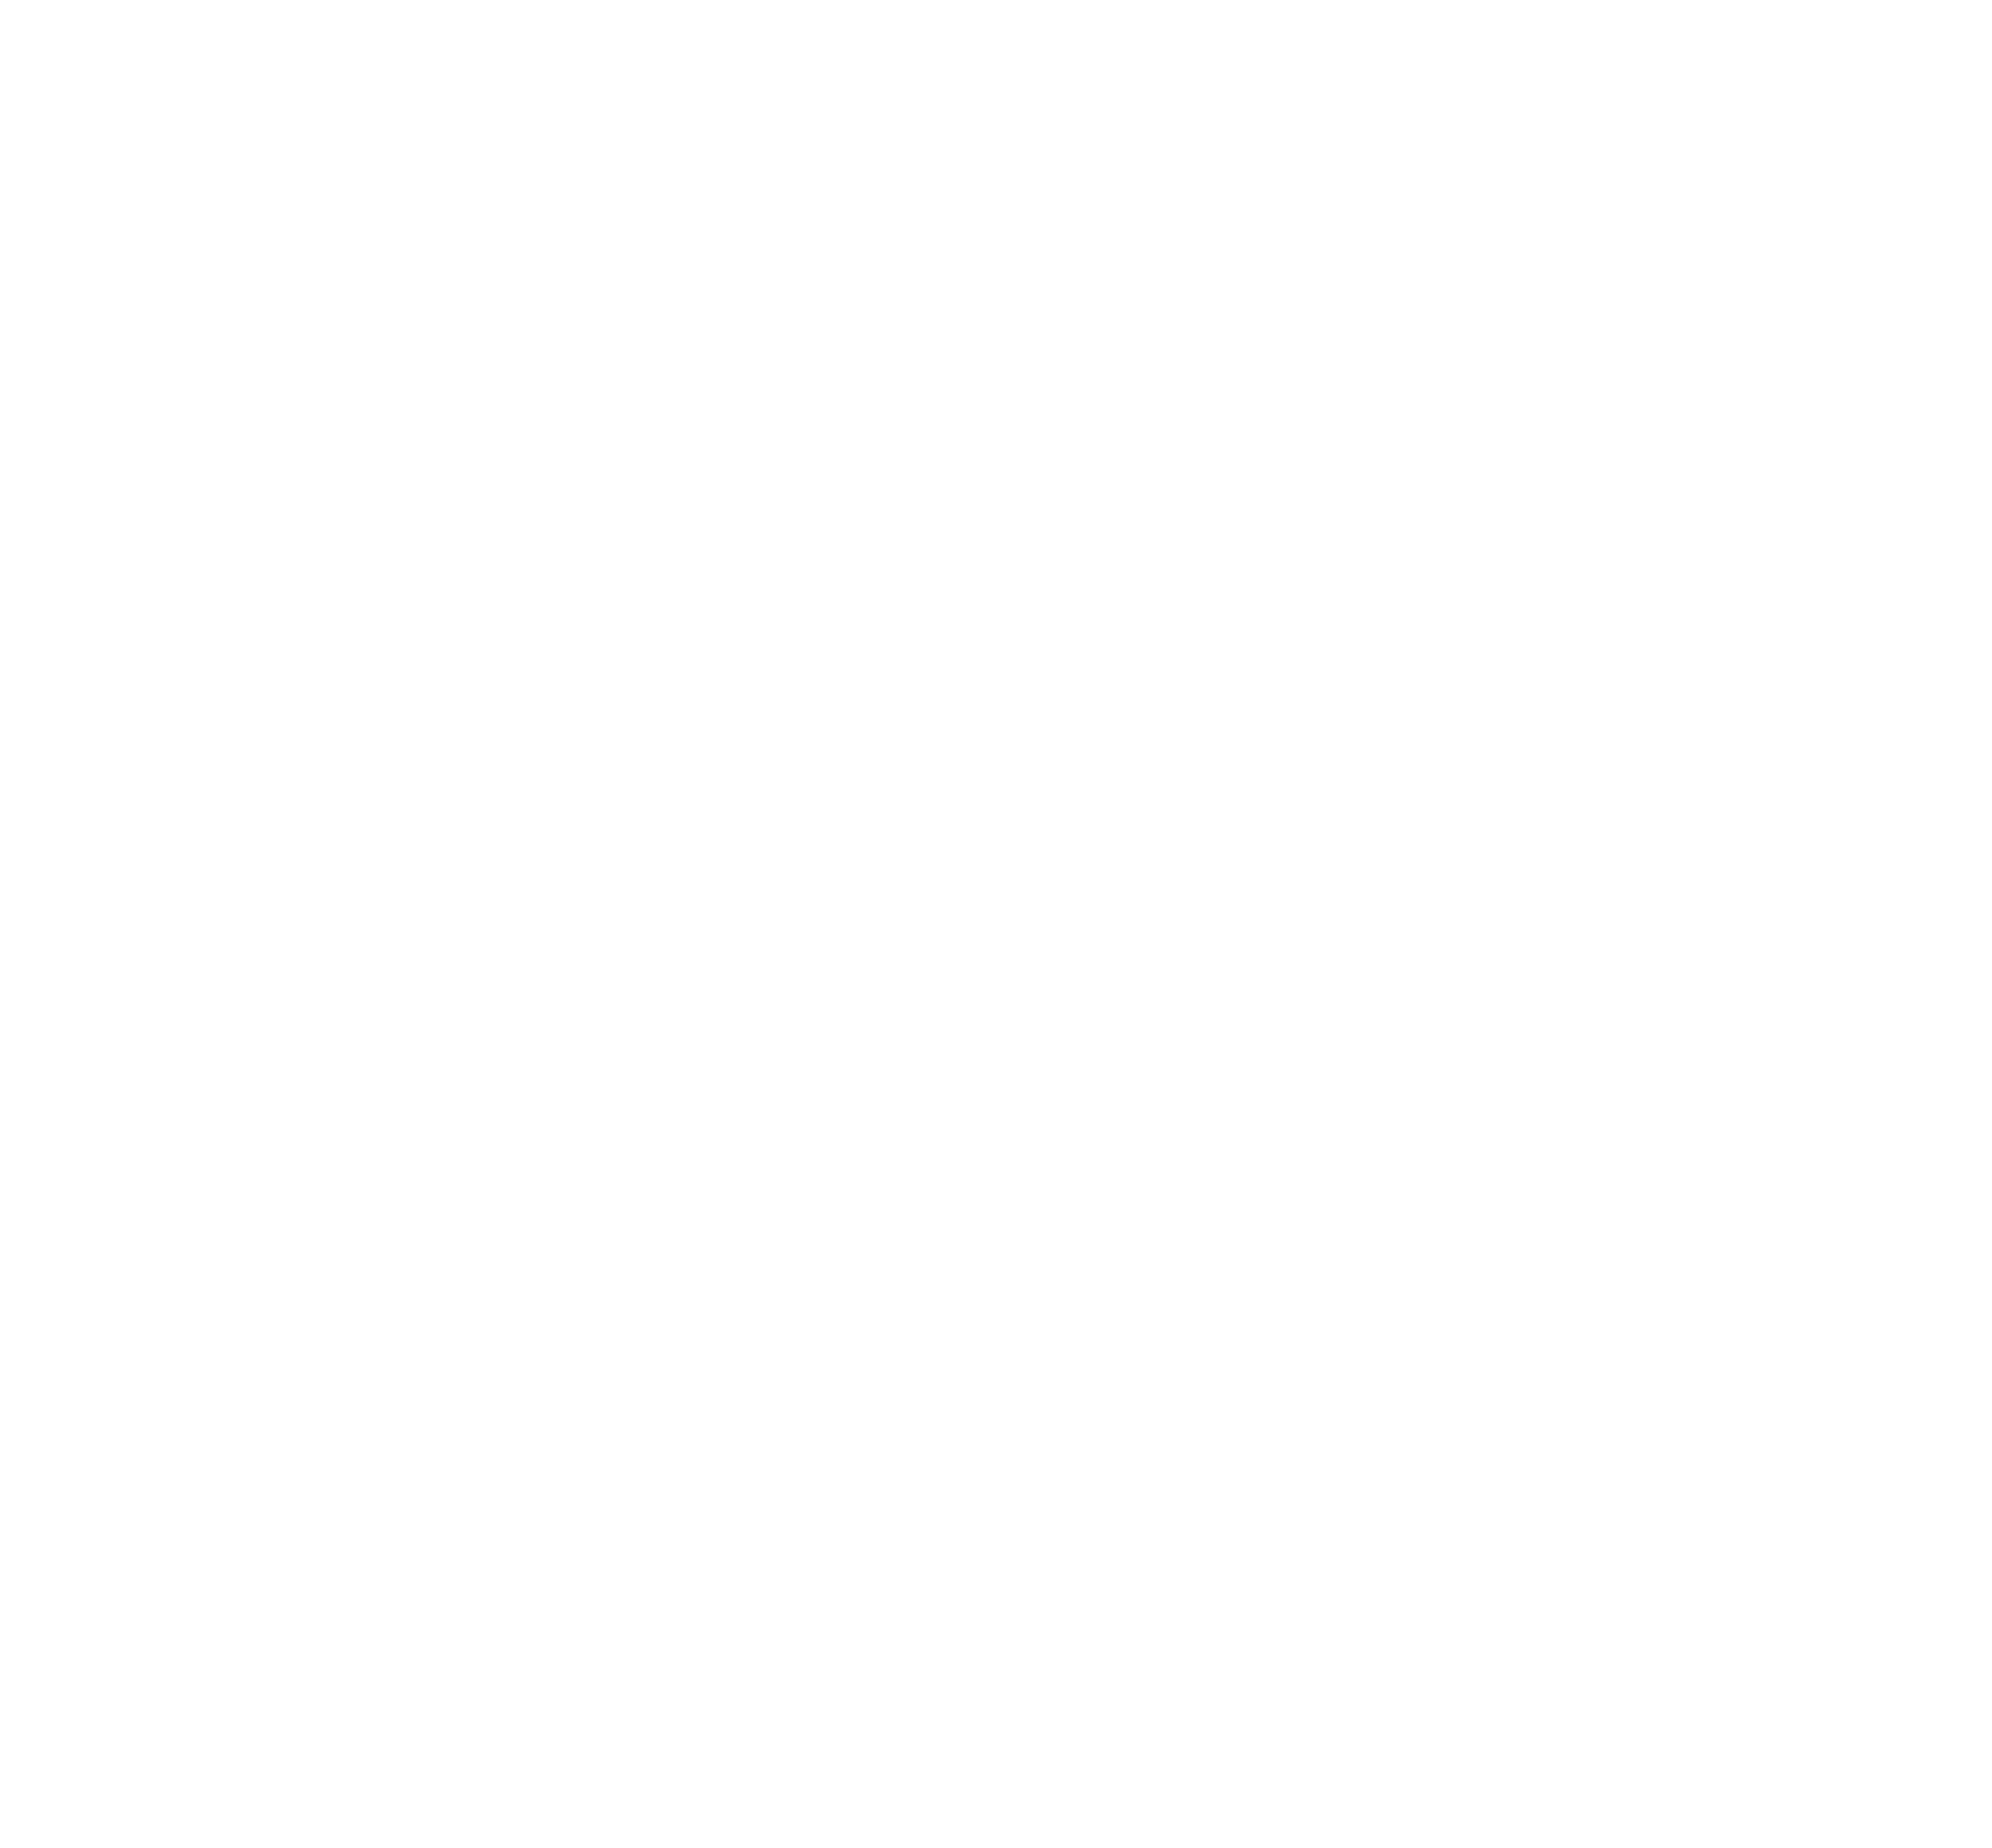 Expedition Logo - Union Gospel Mission | Expeditions | Union Gospel Mission